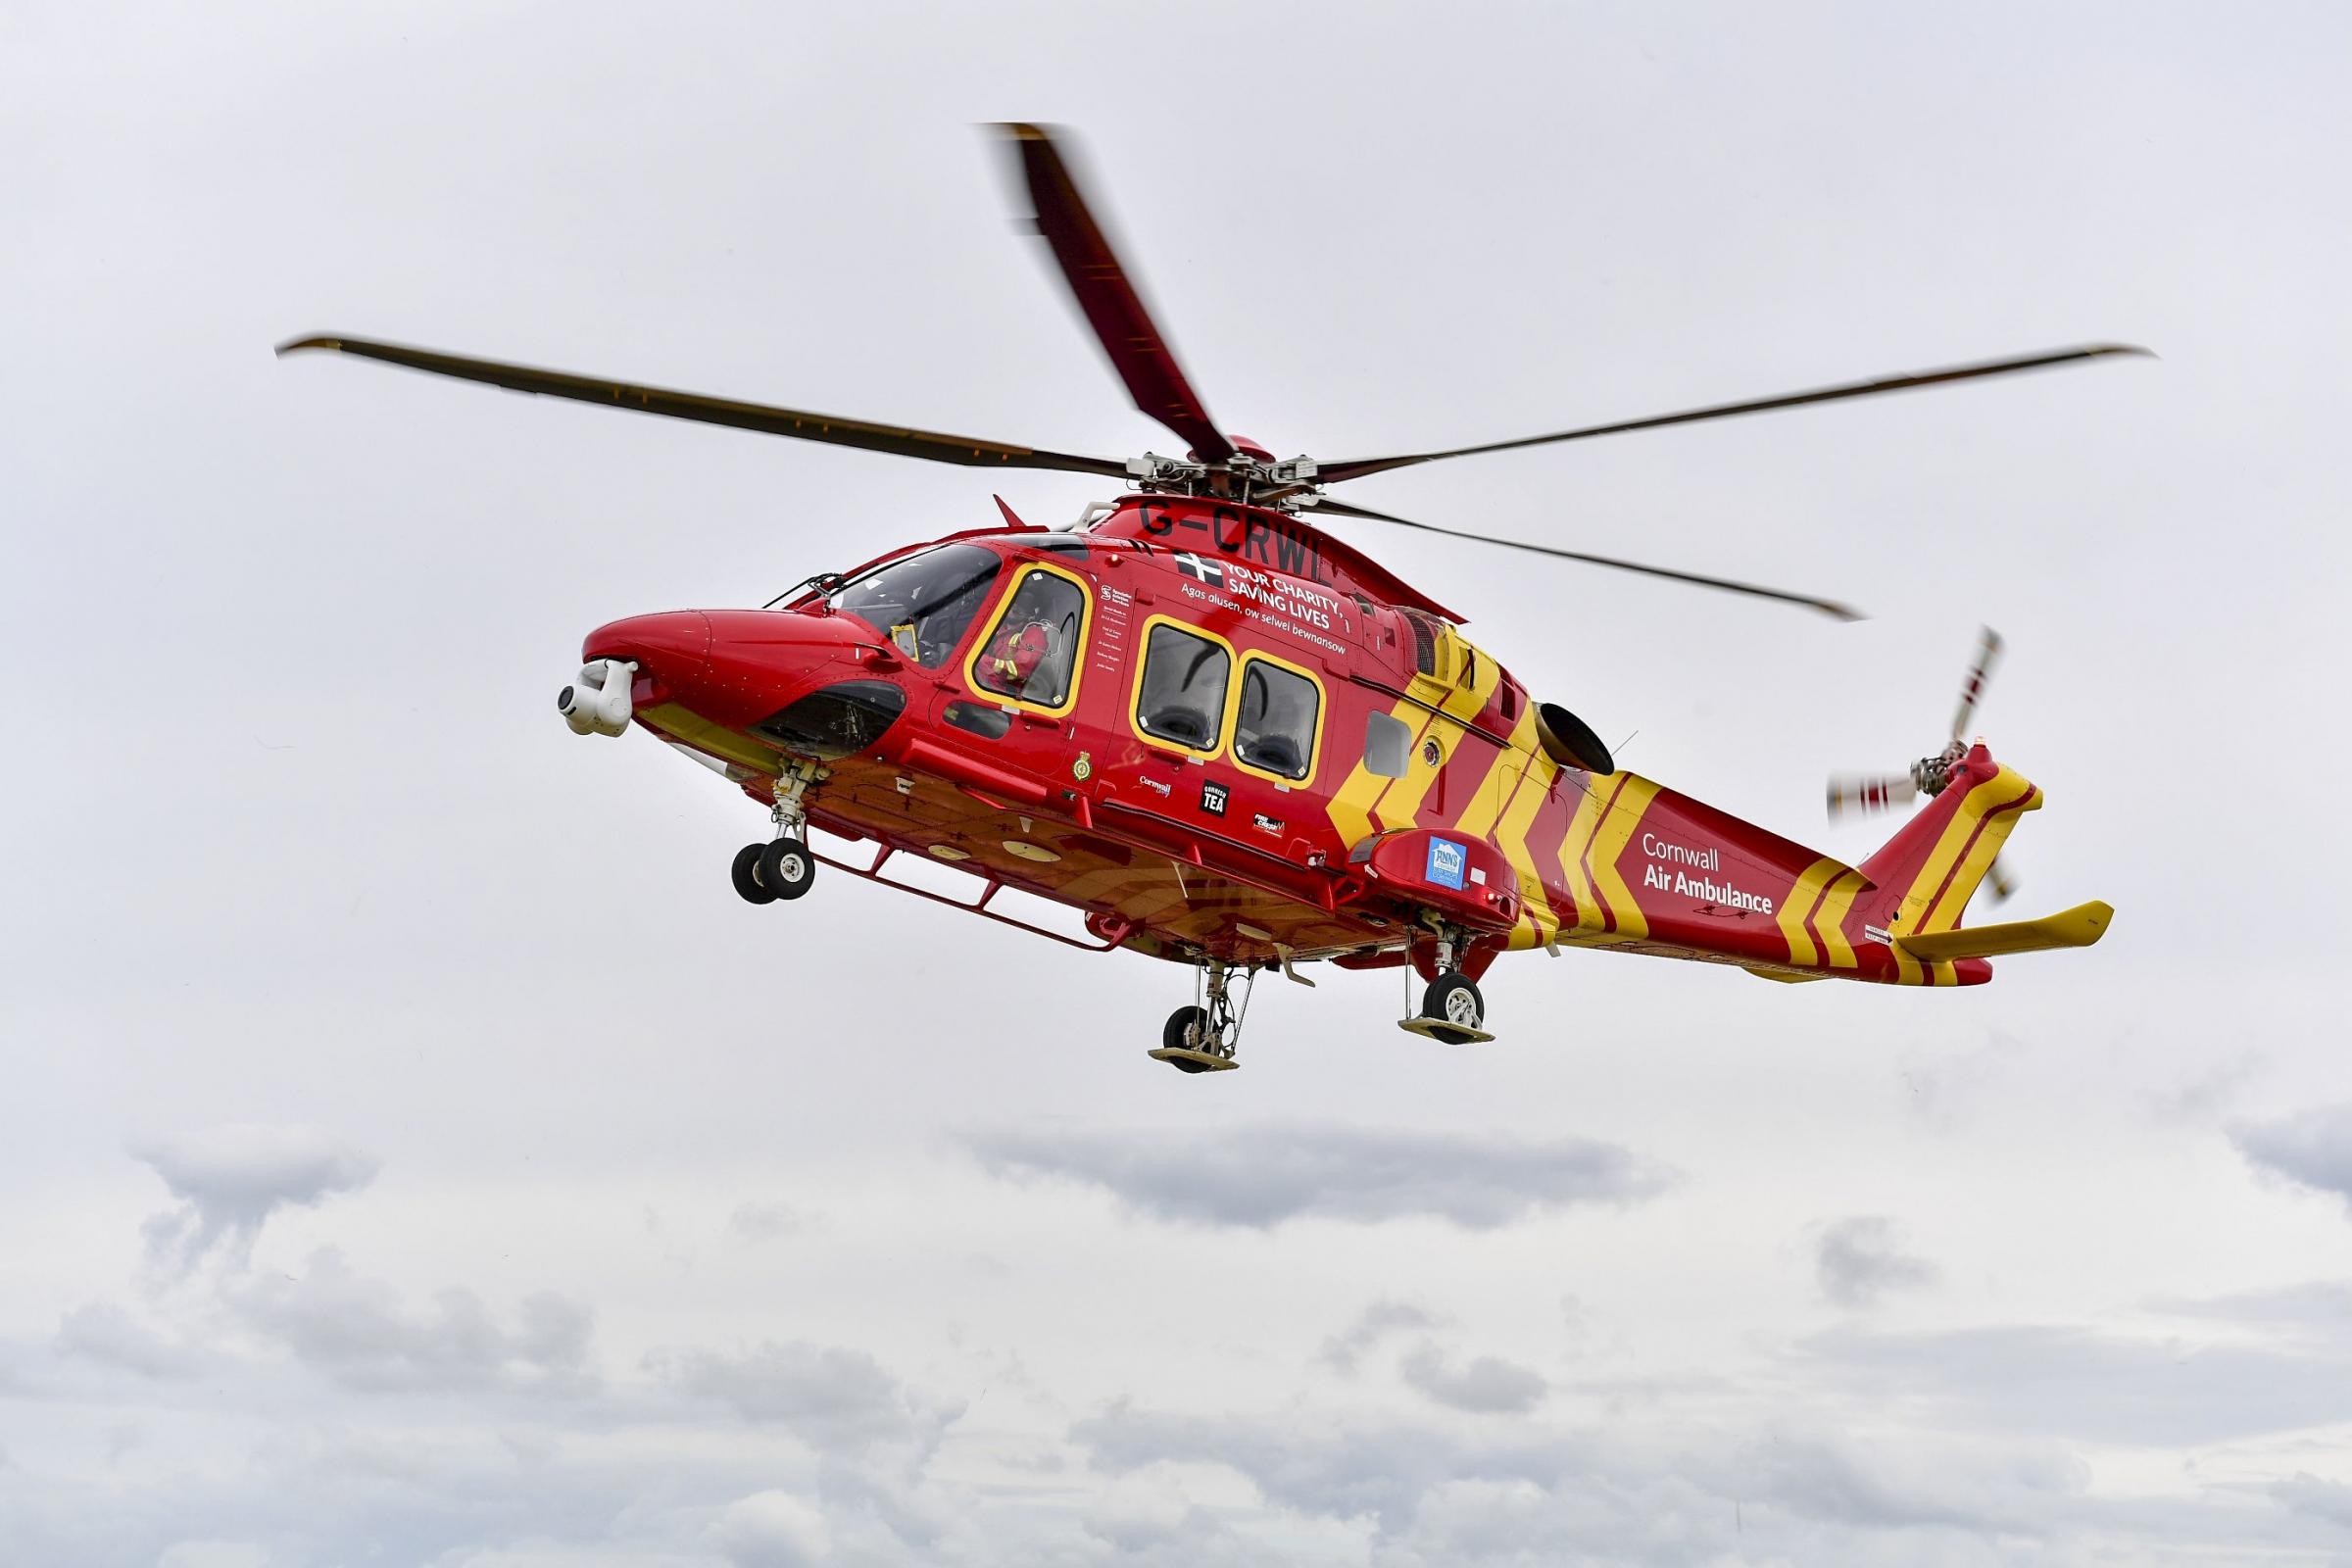 Donations to Cornwall Air Ambulance until December 15 will be doubled via the appeal link